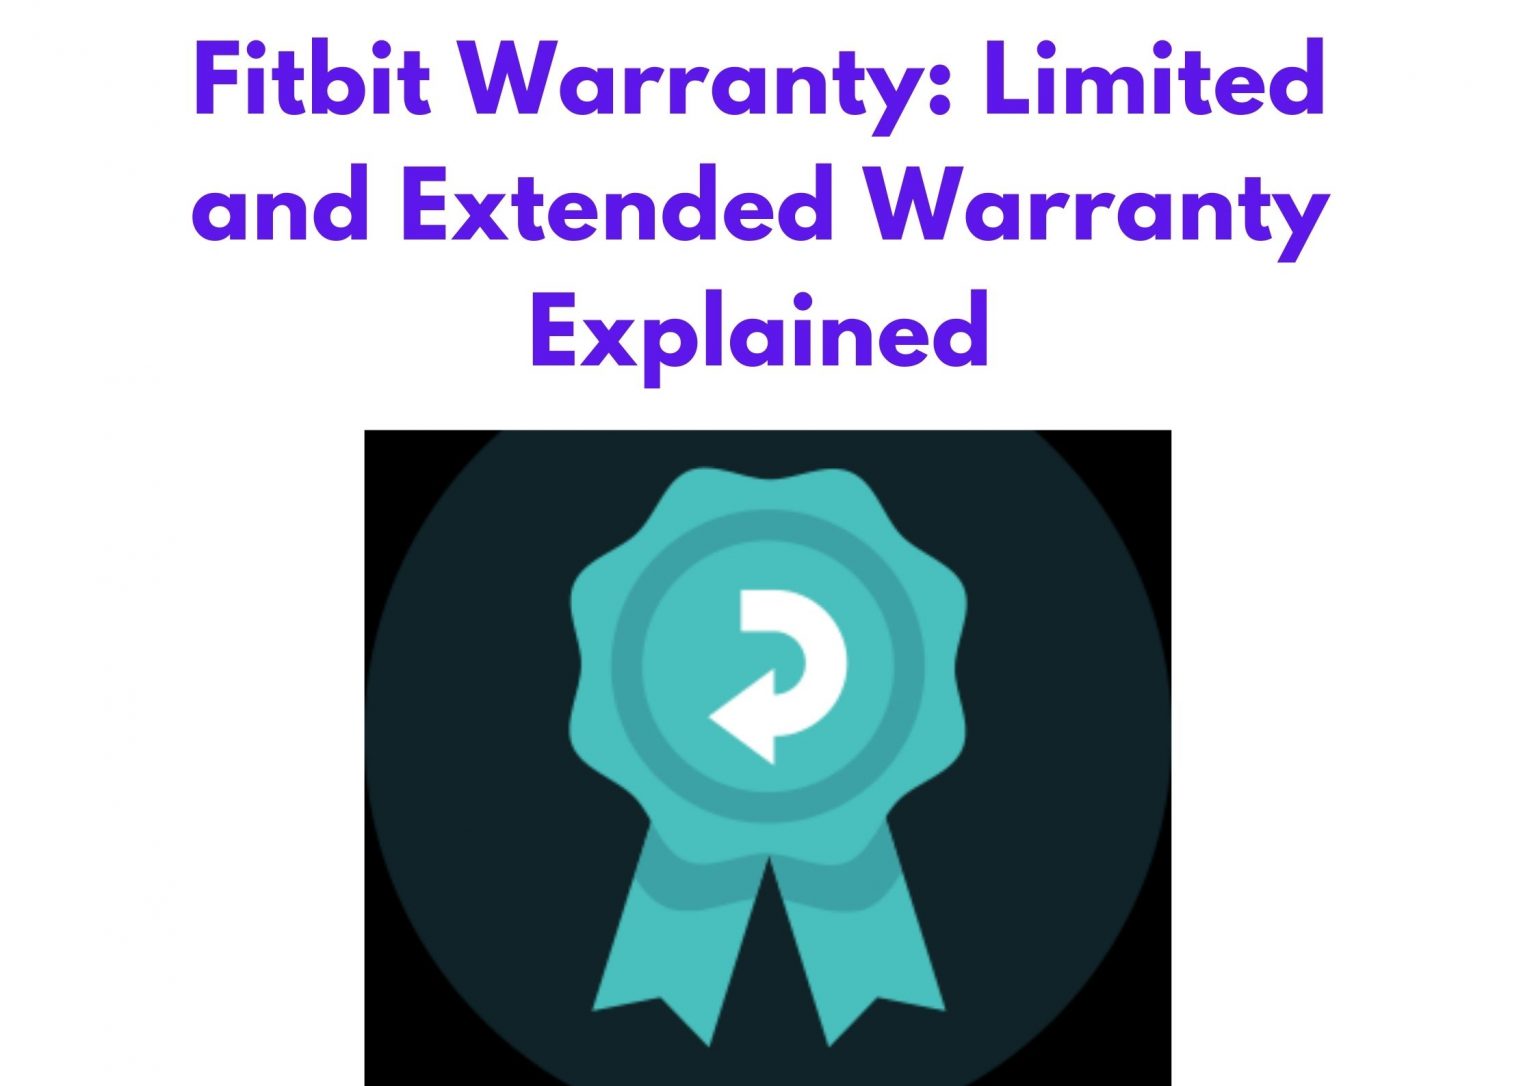 fitbit-warranty-limited-and-extended-warranty-explained